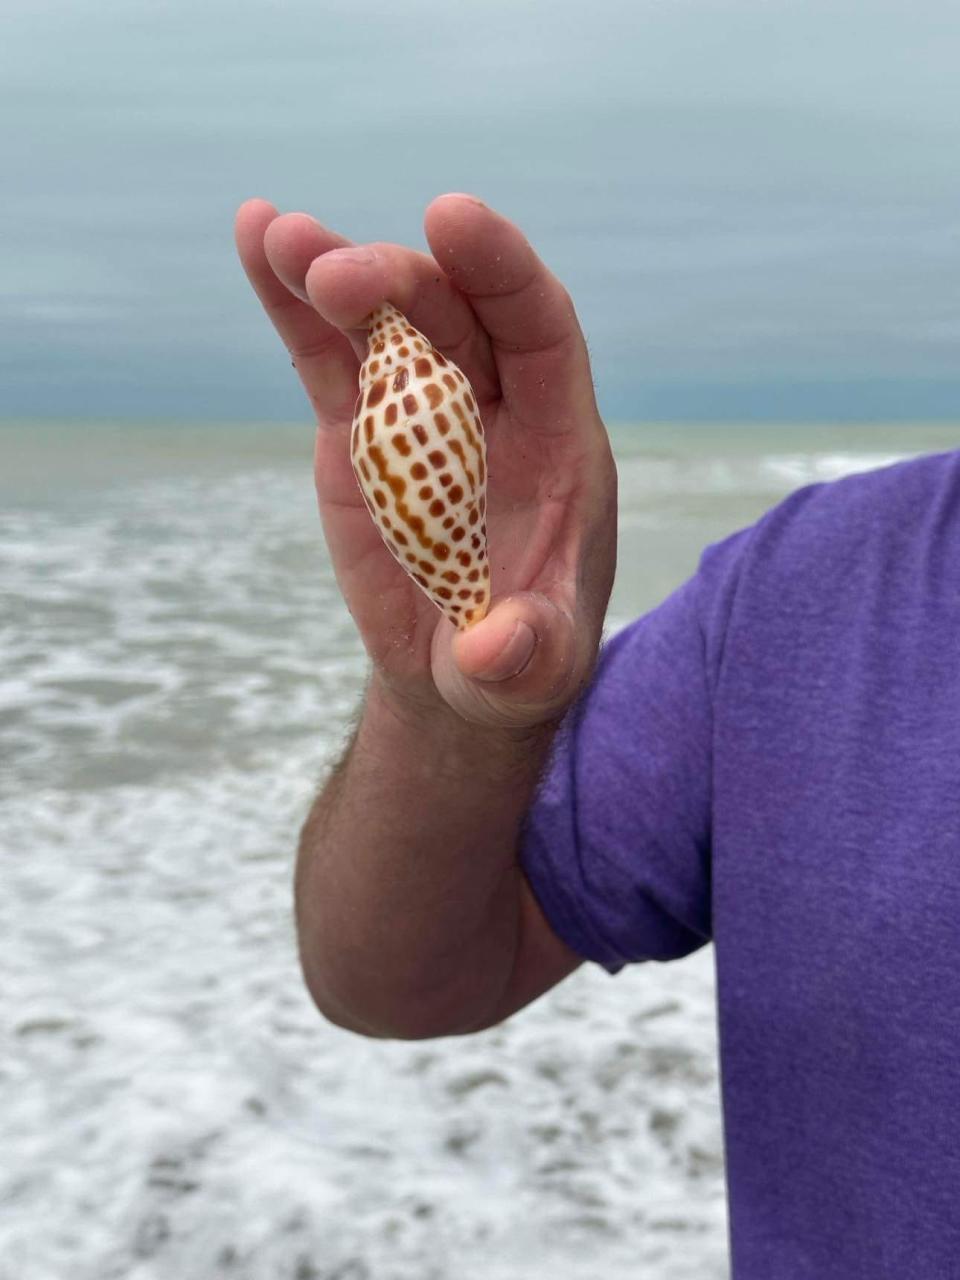 This is a close-up photo of the rare junonia shell Johnnie Ennis found while shelling on Sanibel Island in March.